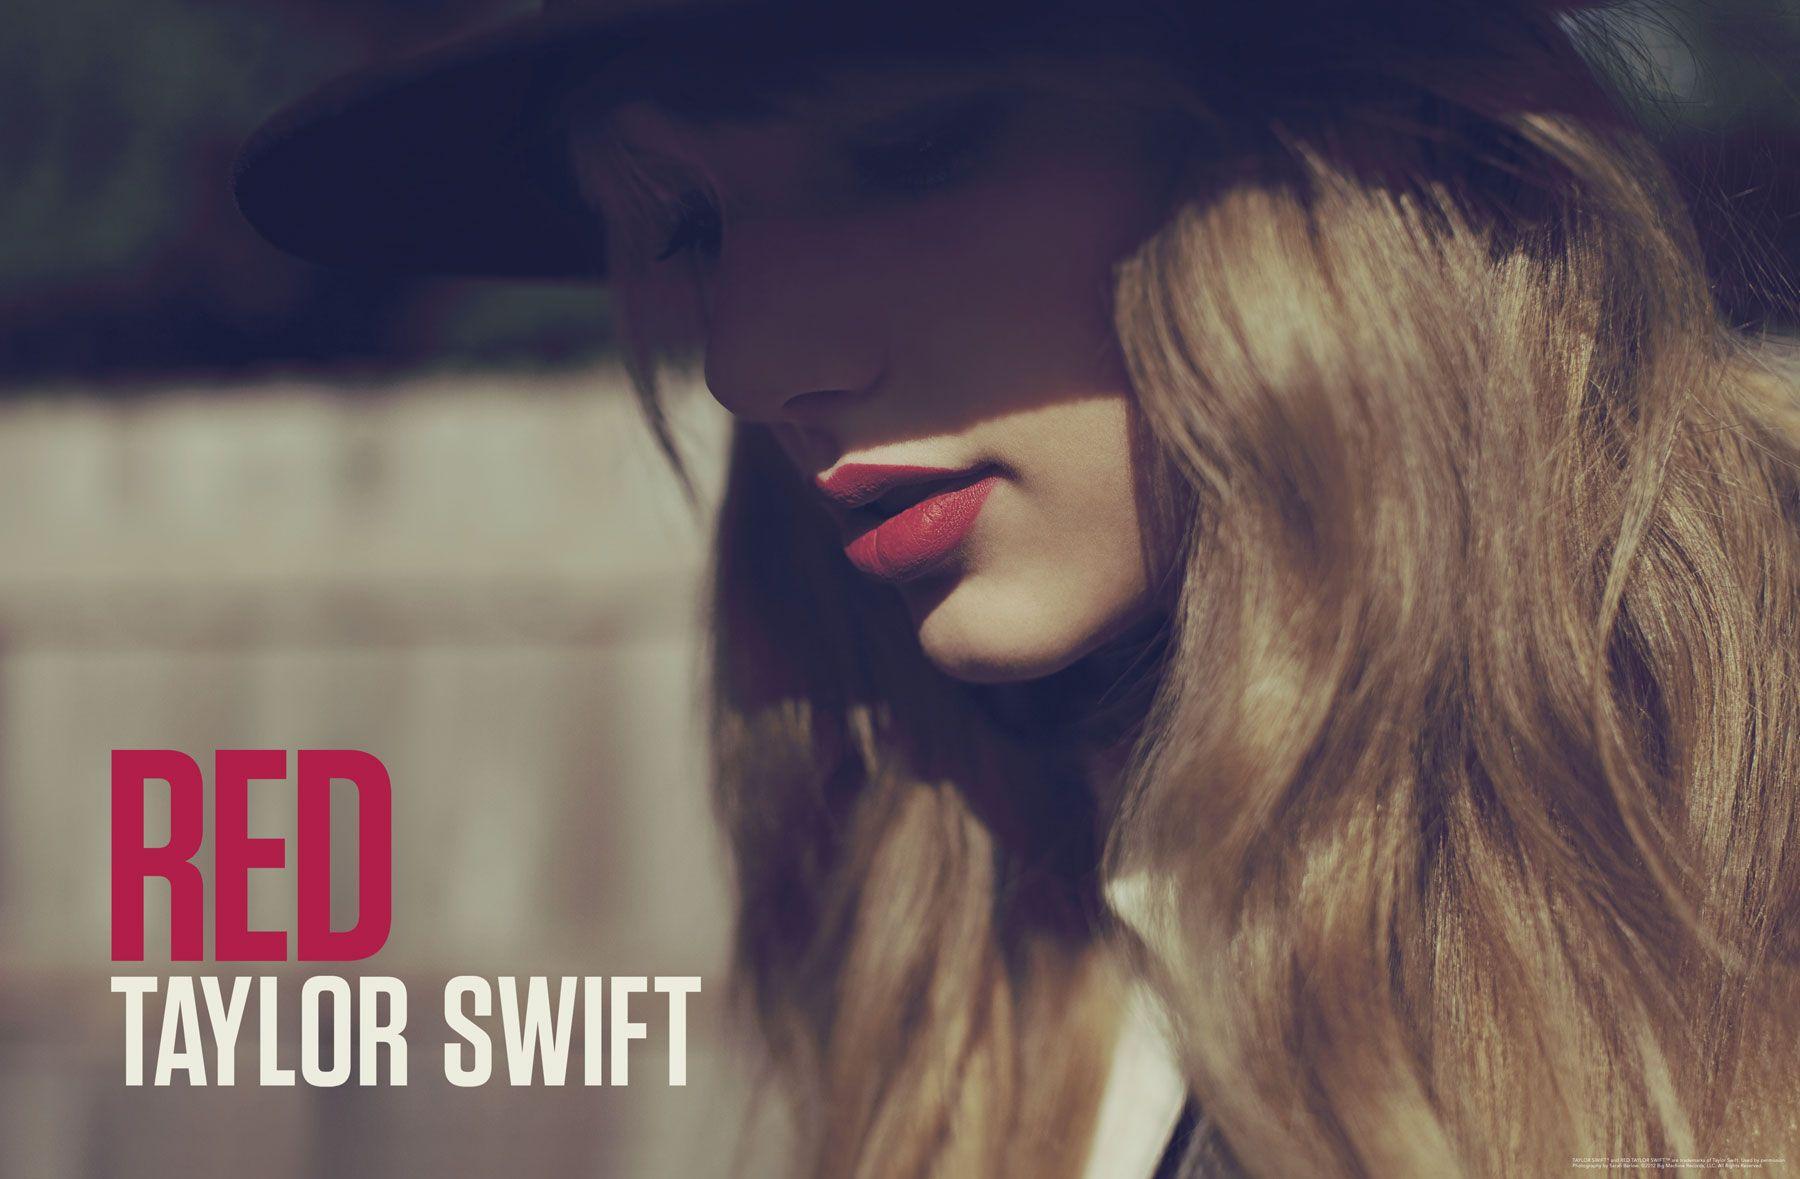 Taylor Swift Red Album Wallpapers Top Free Taylor Swift Red Album Backgrounds Wallpaperaccess